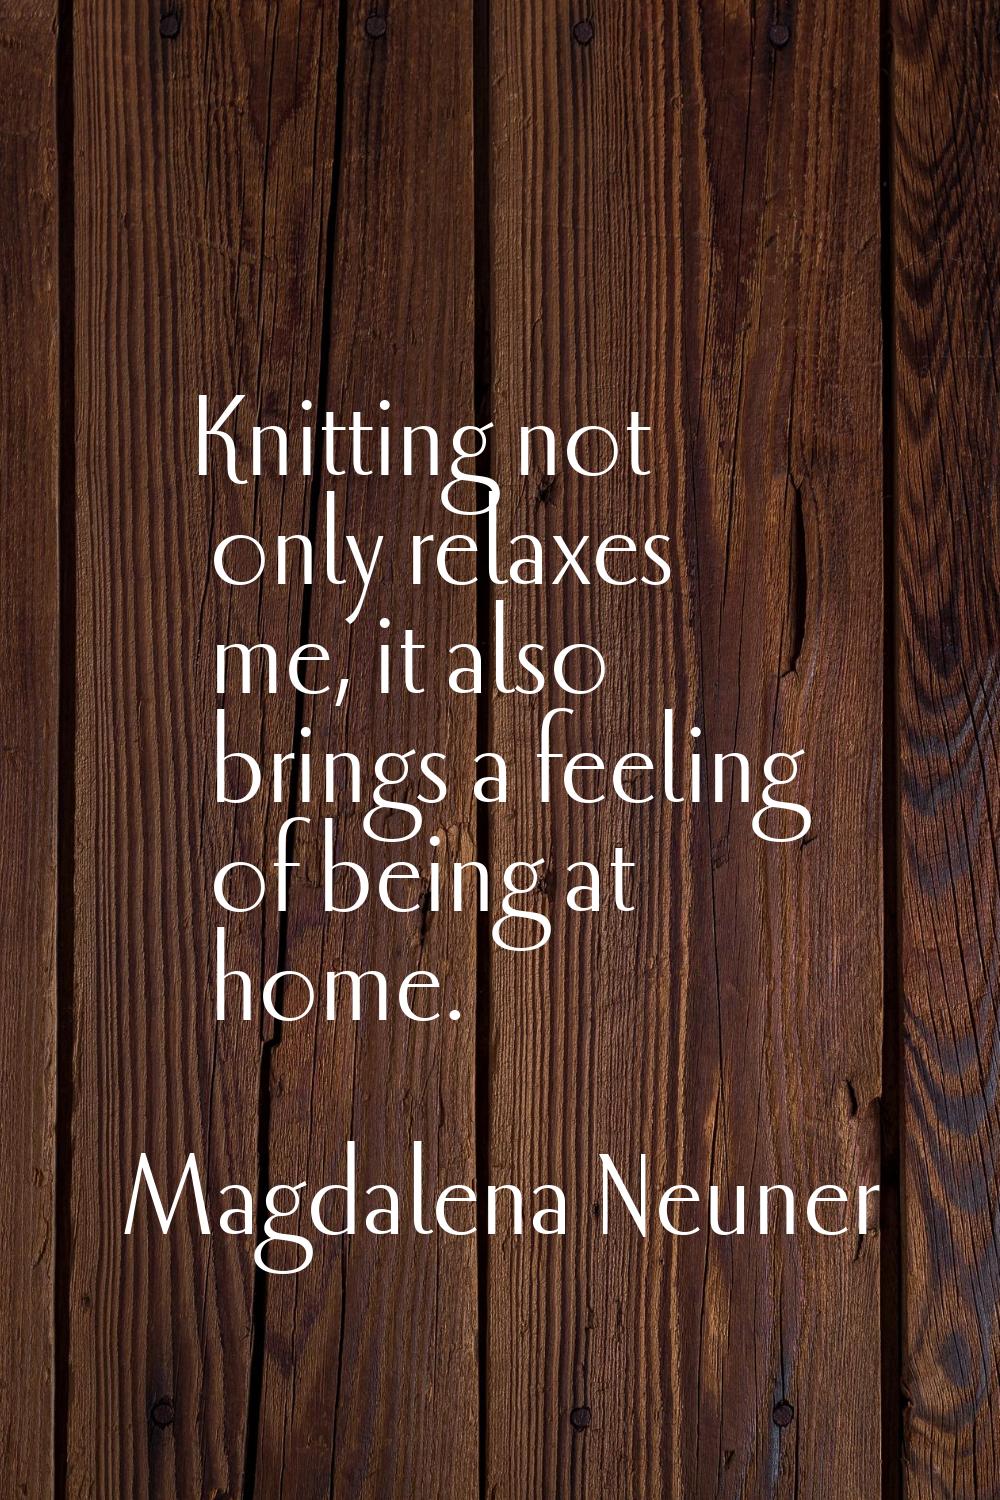 Knitting not only relaxes me, it also brings a feeling of being at home.